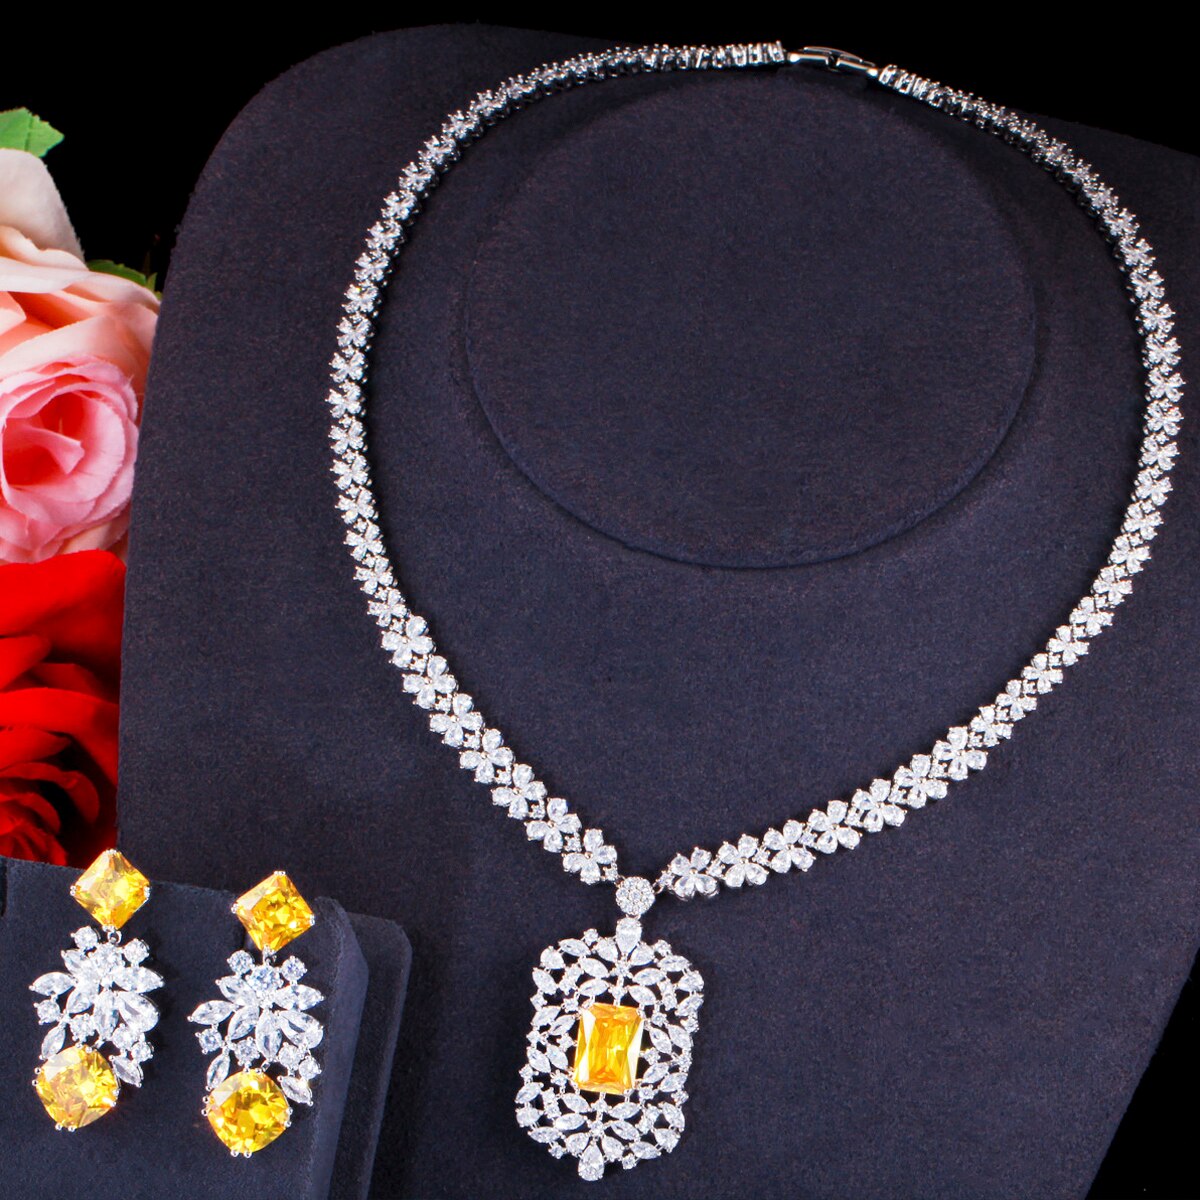 ThreeGraces-Elegant-Yellow-Square-Cubic-Zirconia-Crystal-Silver-Color-Bridal-Wedding-Jewelry-Sets-fo-1005001809304666-13